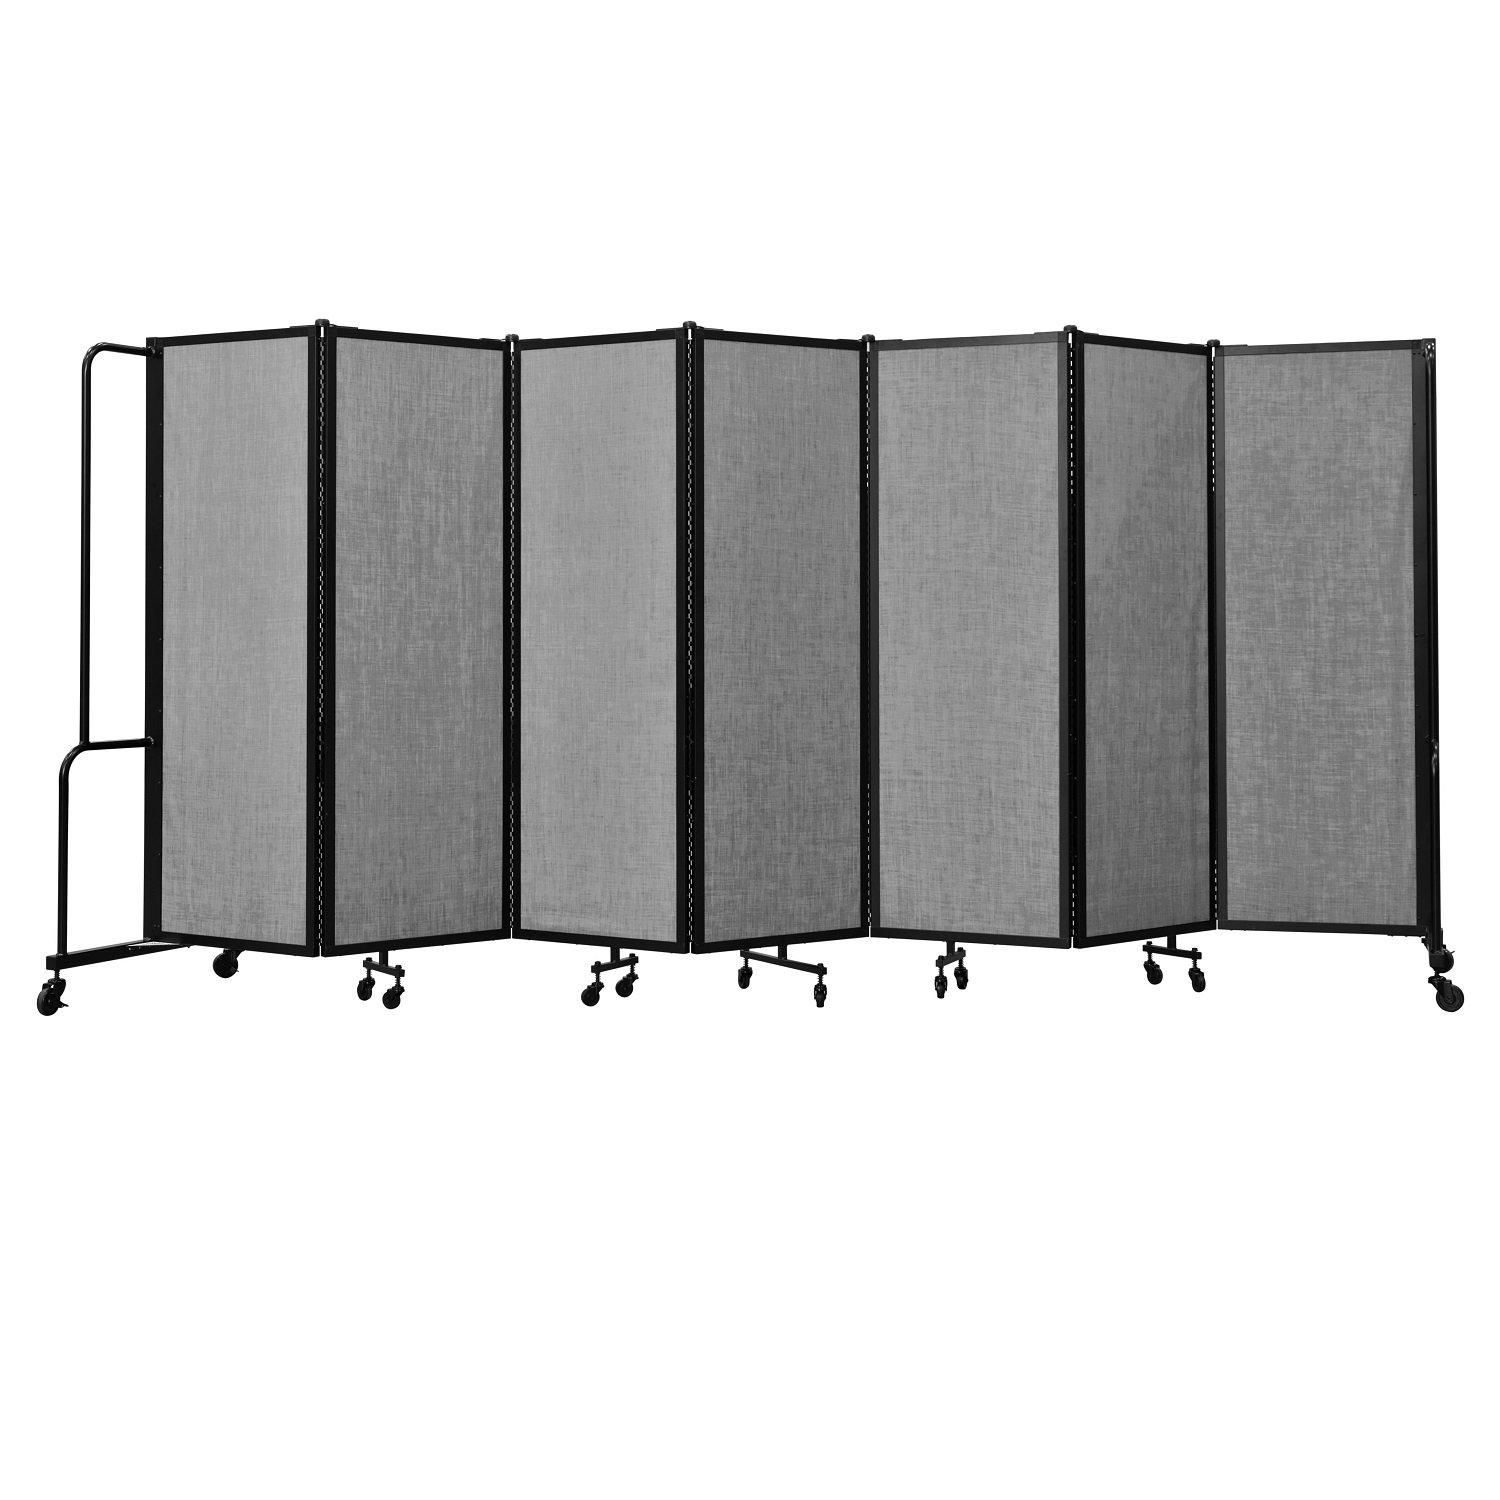 Robo Room Divider with PET Tackable Panels, Black Frame, 6' Height, 7 Sections